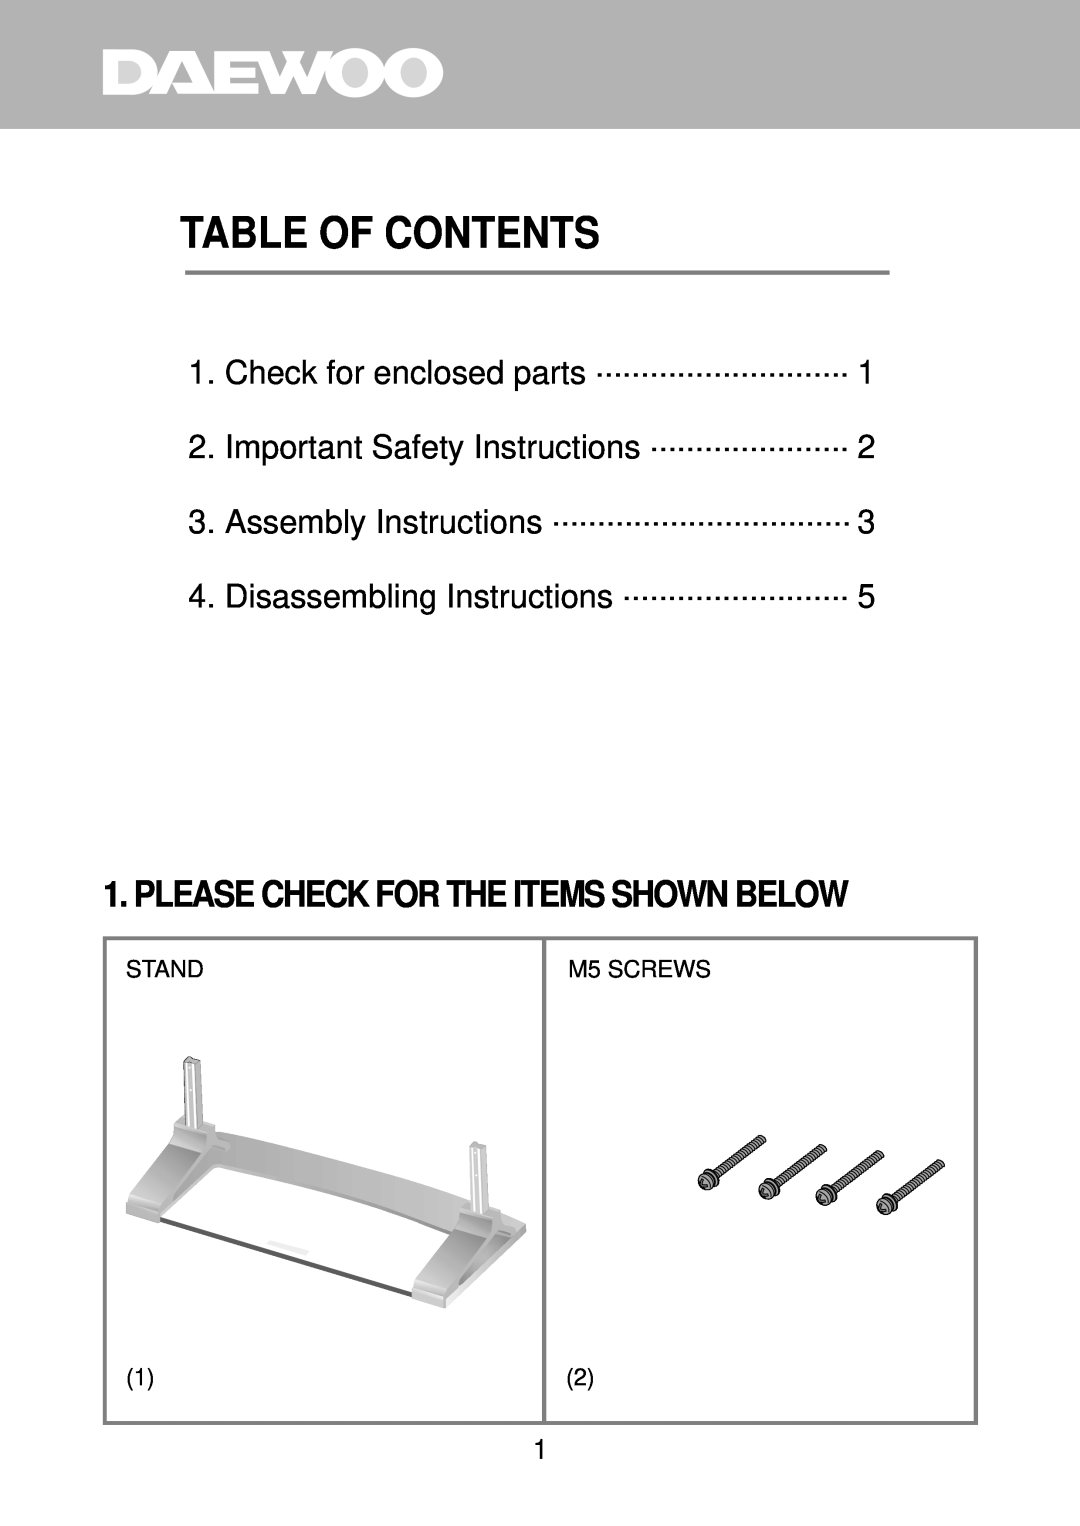 Daewoo DP-ST20, DP-ST21 instruction manual Please Check For The Items Shown Below, Table Of Contents, Stand, M5 SCREWS 